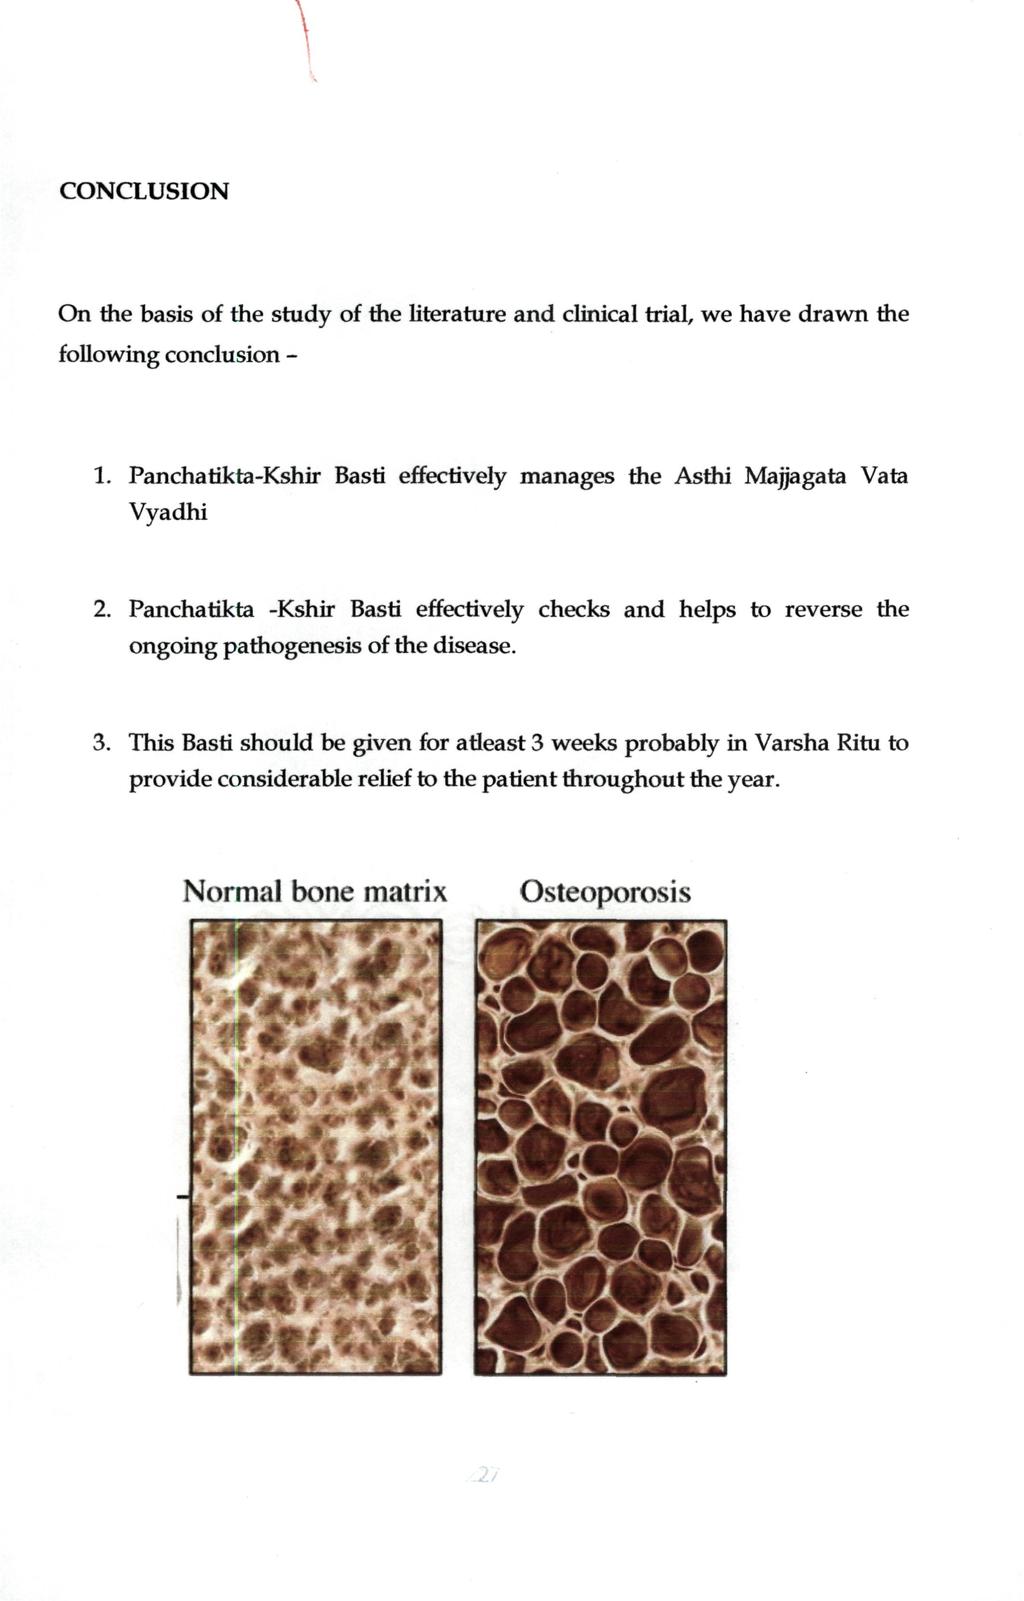 CONCLUSION On the basis of the study of the literature and clinical trial, we have drawn the following conclusion - 1. Panchatikta-Kshir Basti effectively manages the Asthi Majjagata Vata Vyadhi 2.